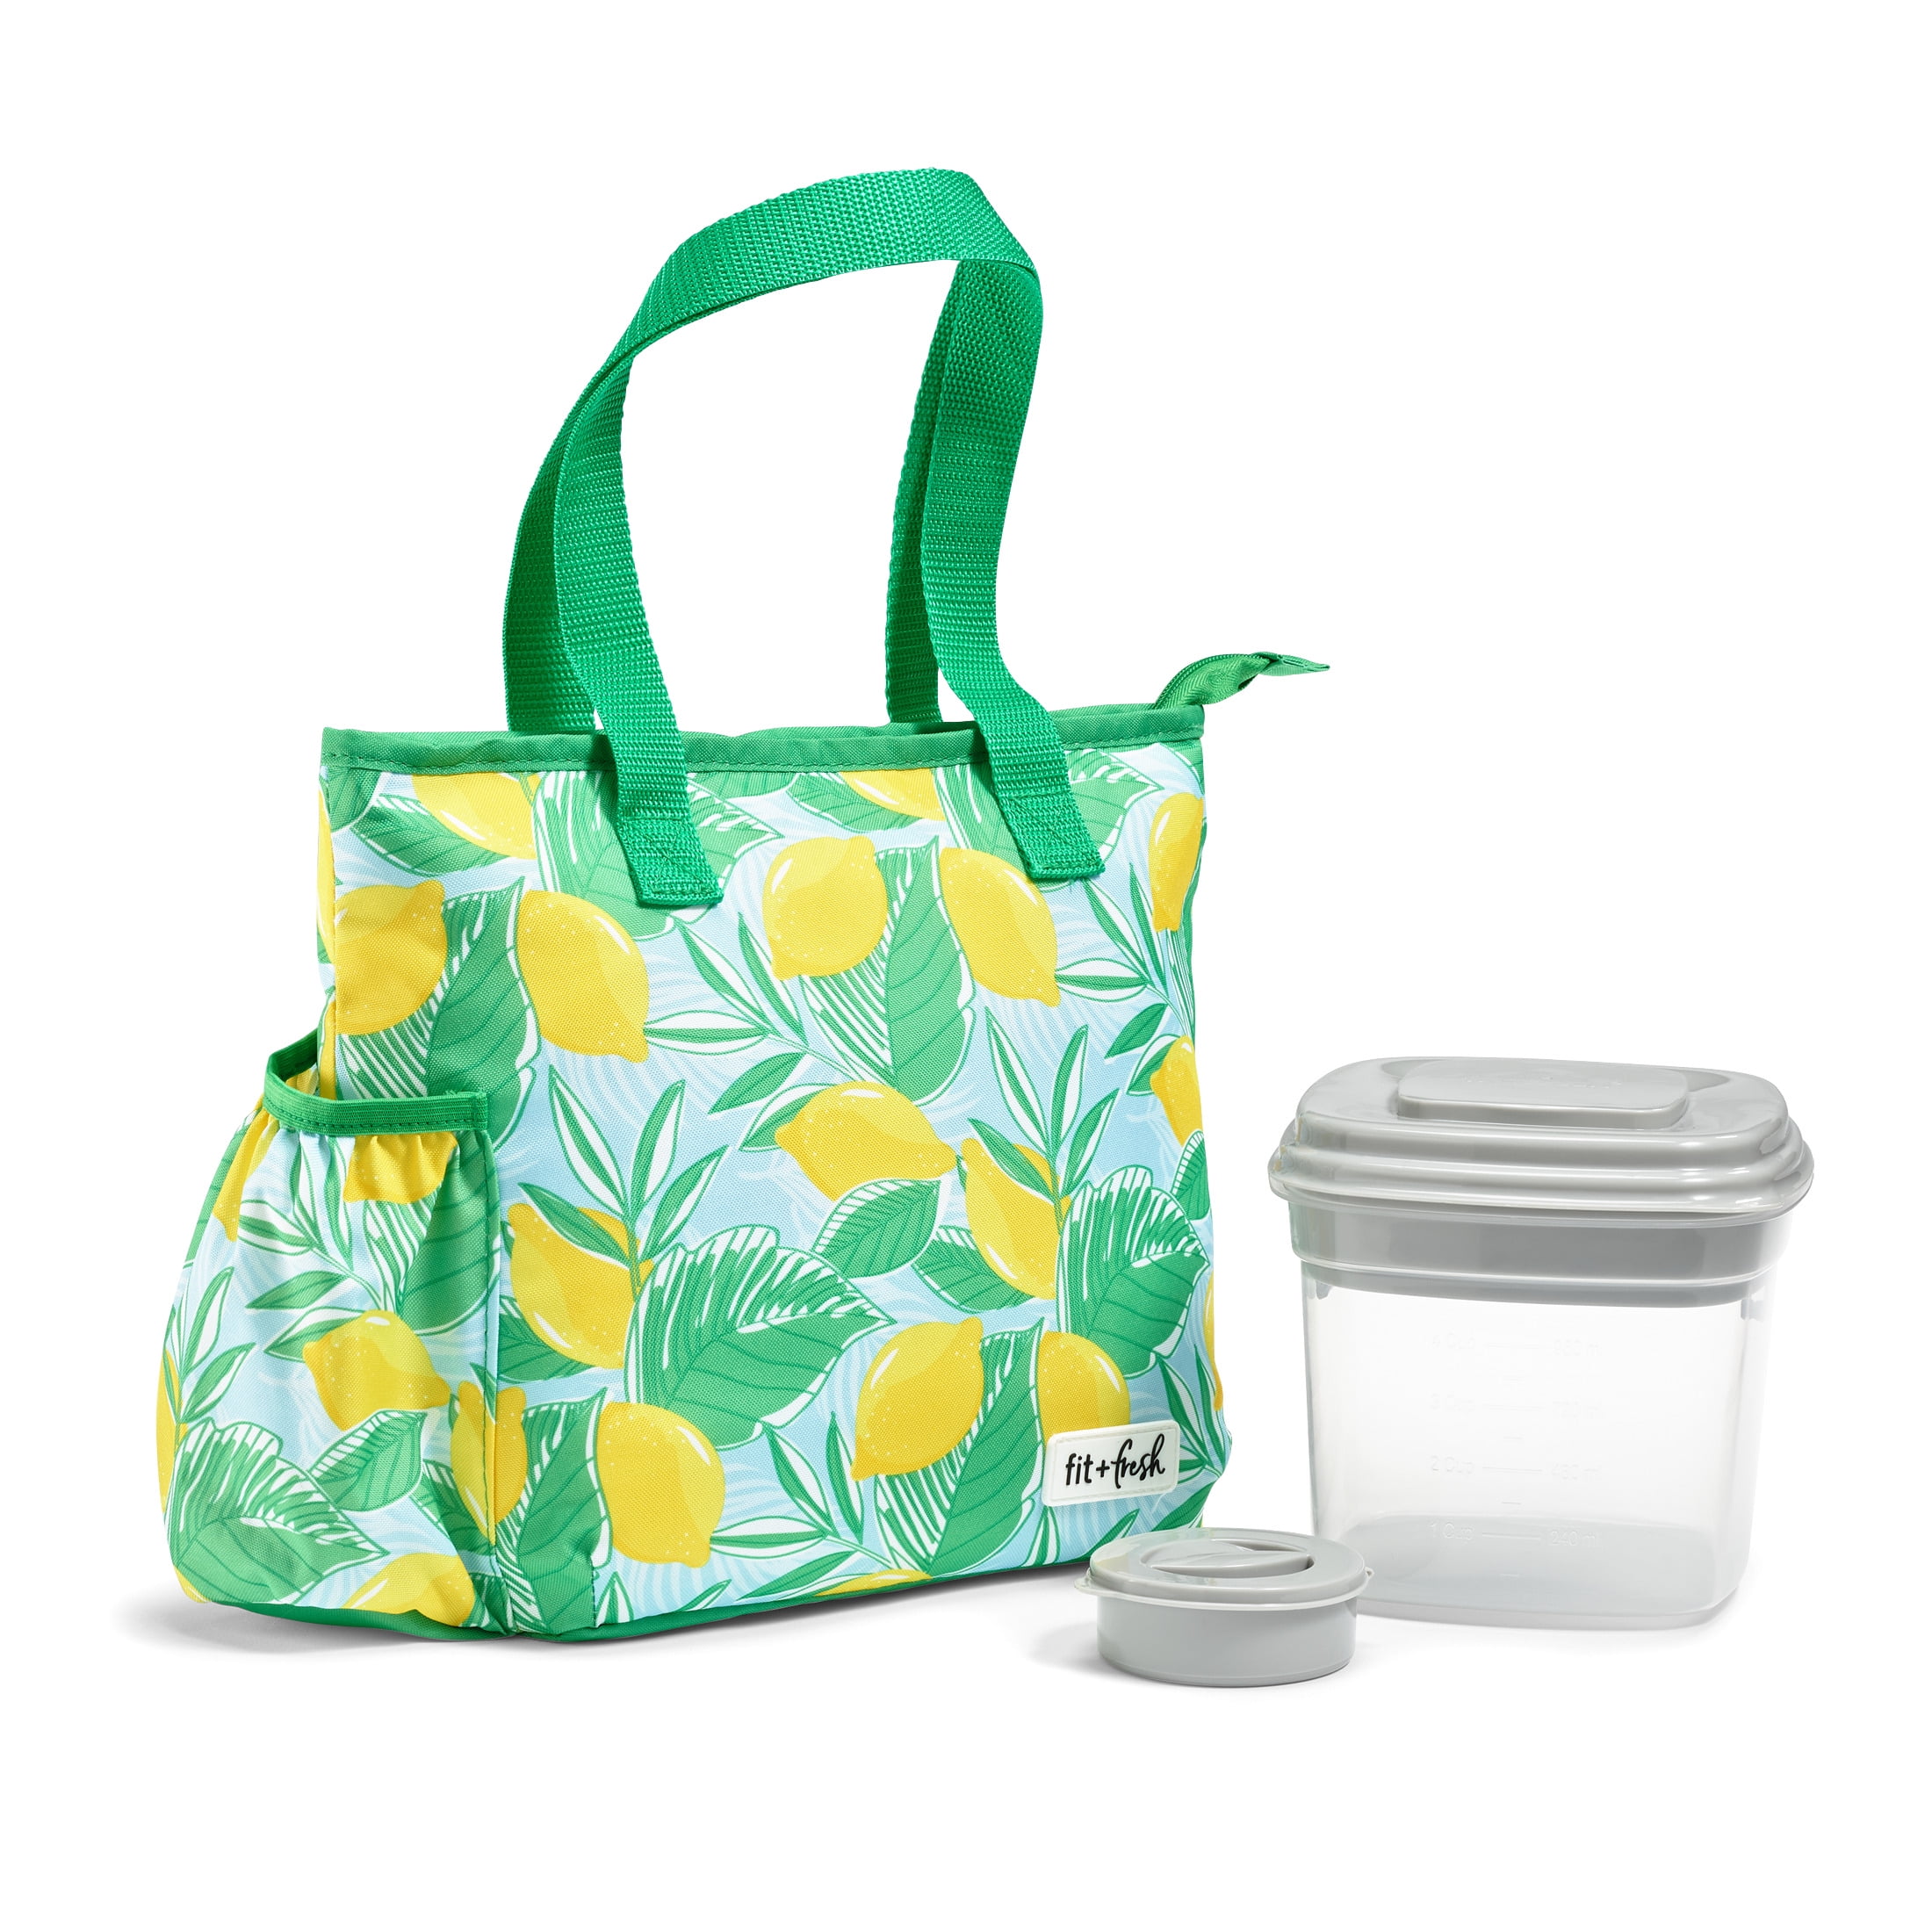 picnic Cooler Bag school beach Insulated Lunch Box work Fit & Fresh Minneola Lunch Bag with Six Containers office Dot Thermal Lunch Bag Women Tote Bag Soft Liner Lunch Bag for women